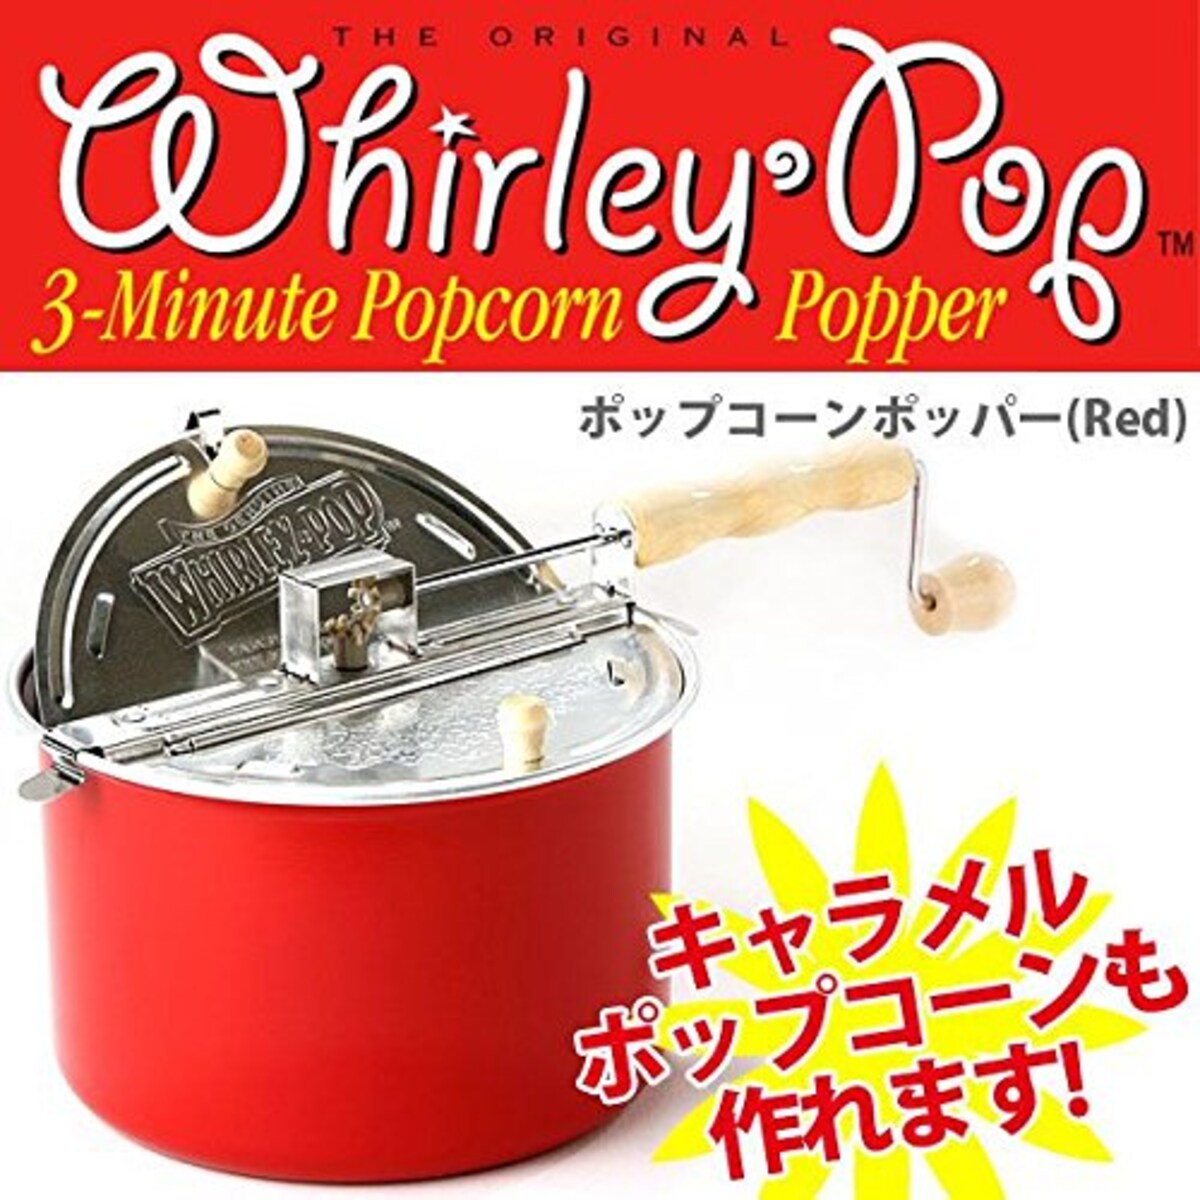 Whirley Pop（Red）